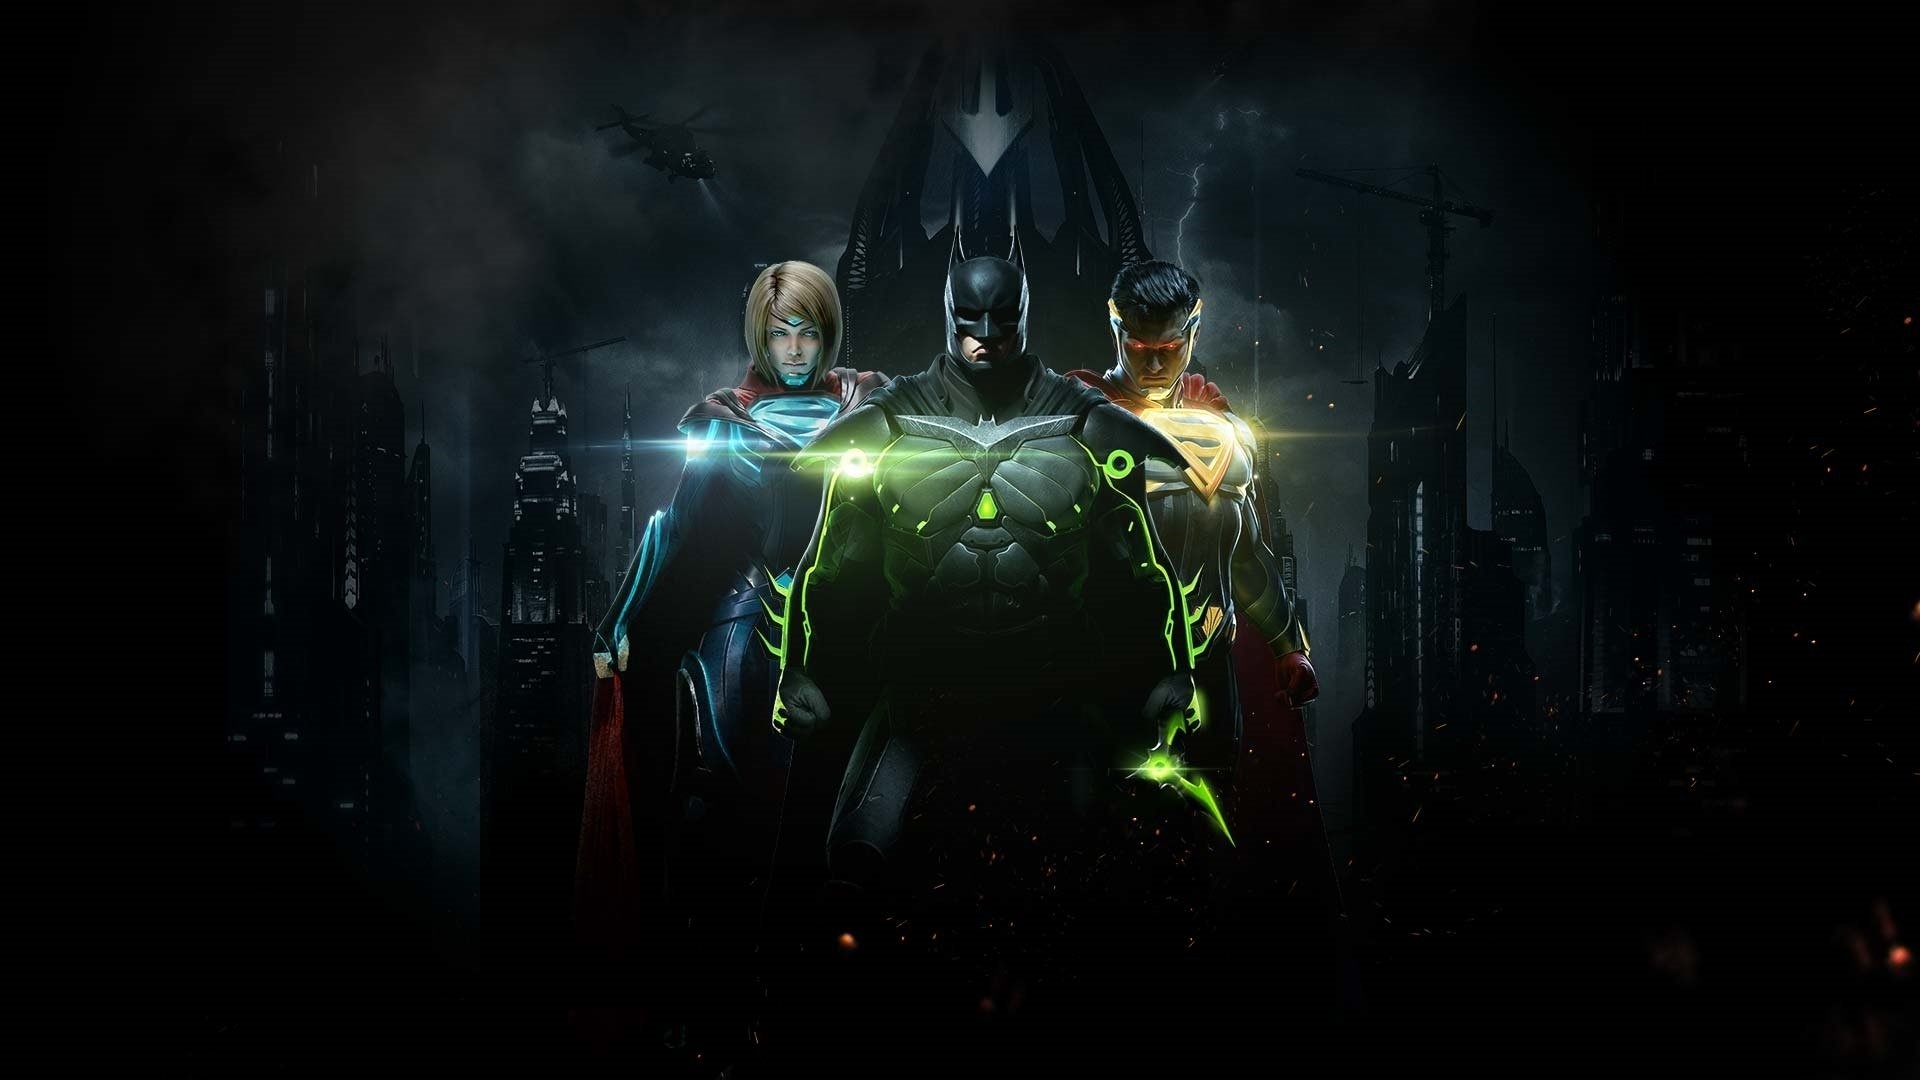 Injustice 2 Gaming, HD wallpapers, Background images, Gaming art, 1920x1080 Full HD Desktop